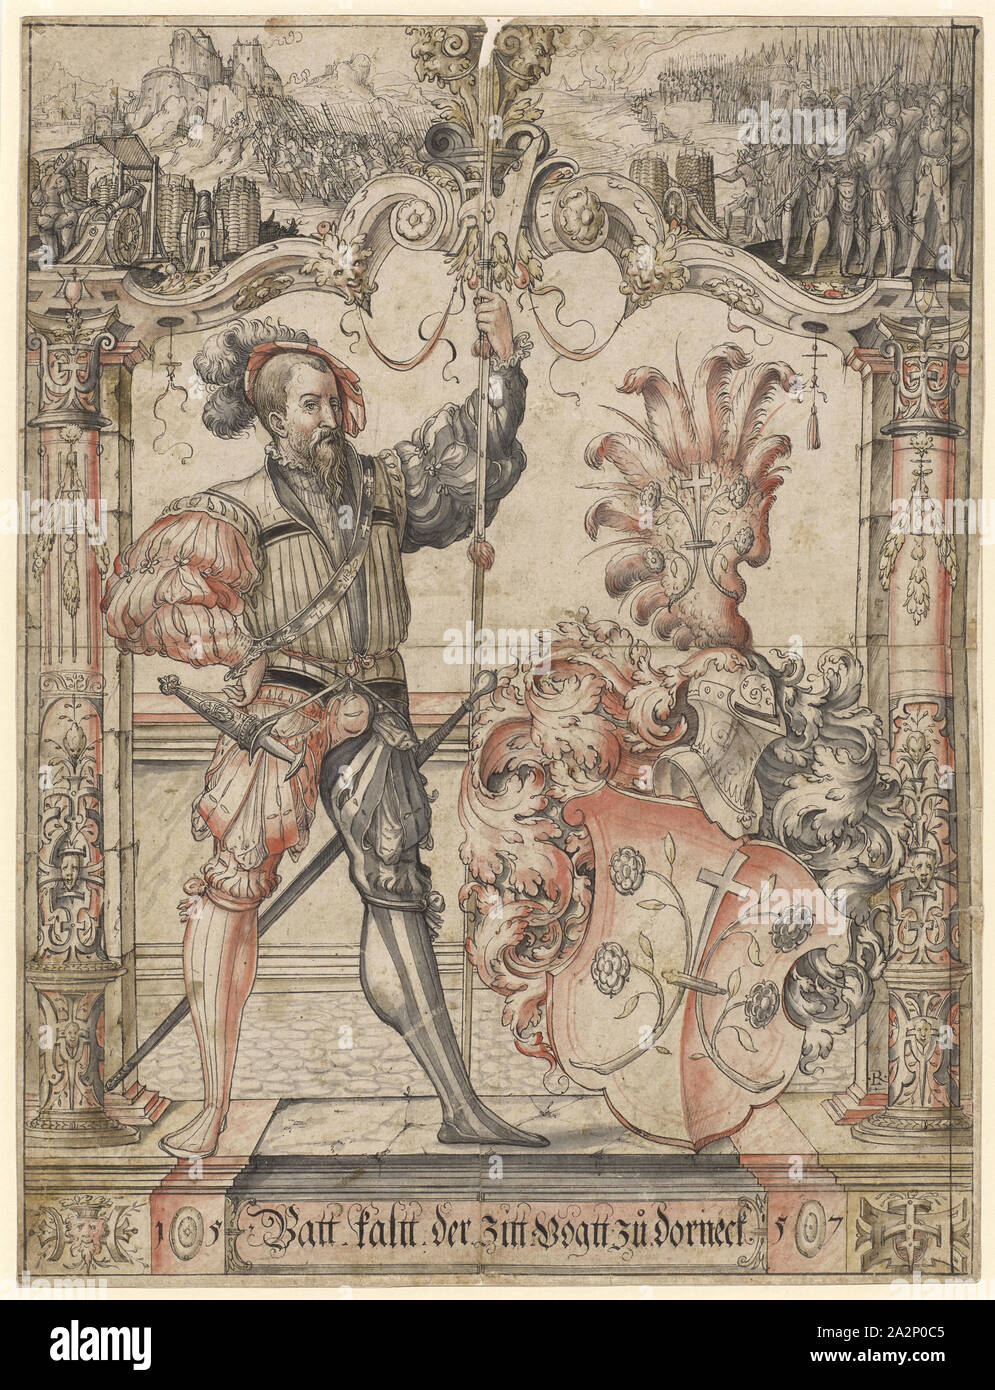 Disc tear with warrior as a shield companion and the coat of arms of Beat Cold Dorneck, Vogt of Solothurn, in the Oberbild siege of a castle (Dorneck?), 1557, feather in black, gray washed, in places with pink and olive green watercolors, old laminated, page: 44.2, x 33.4 cm |, Image: 43.4 x 32.8 cm, U. r., monogrammed on the pillar: LR [lig.], u, ., in the cartouche inscribed: Batt., Cold., the ., tremble., Vogtt., too., Dorneck, ., l, ., and r., dated: 15 57, Ludwig Ringler, Basel 1536–1606 Basel Stock Photo